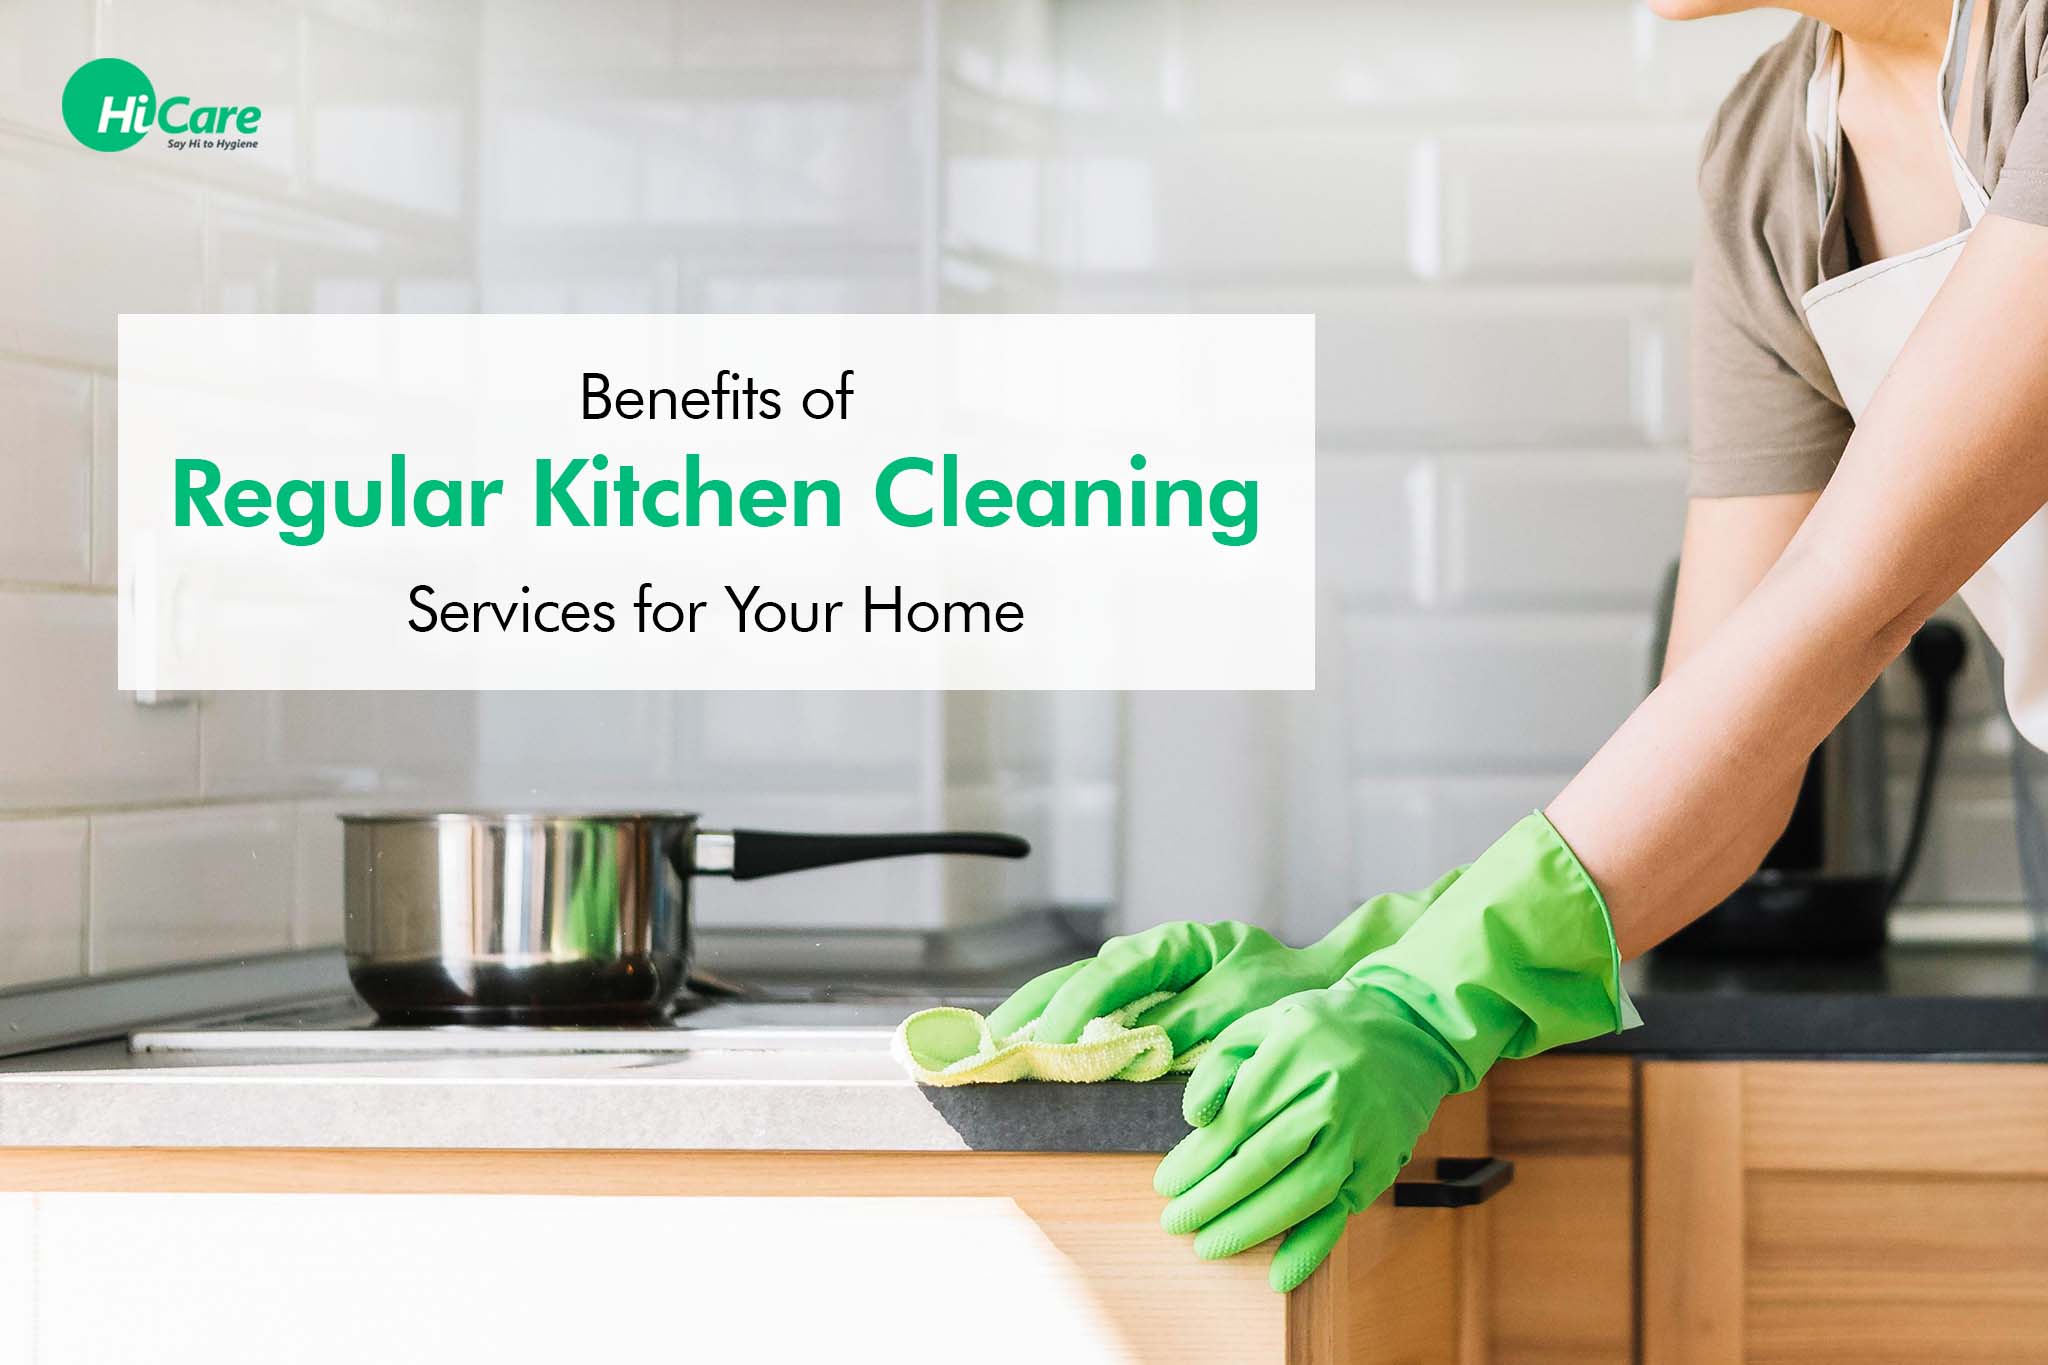 Benefits of Regular Kitchen Cleaning Services for Your Home